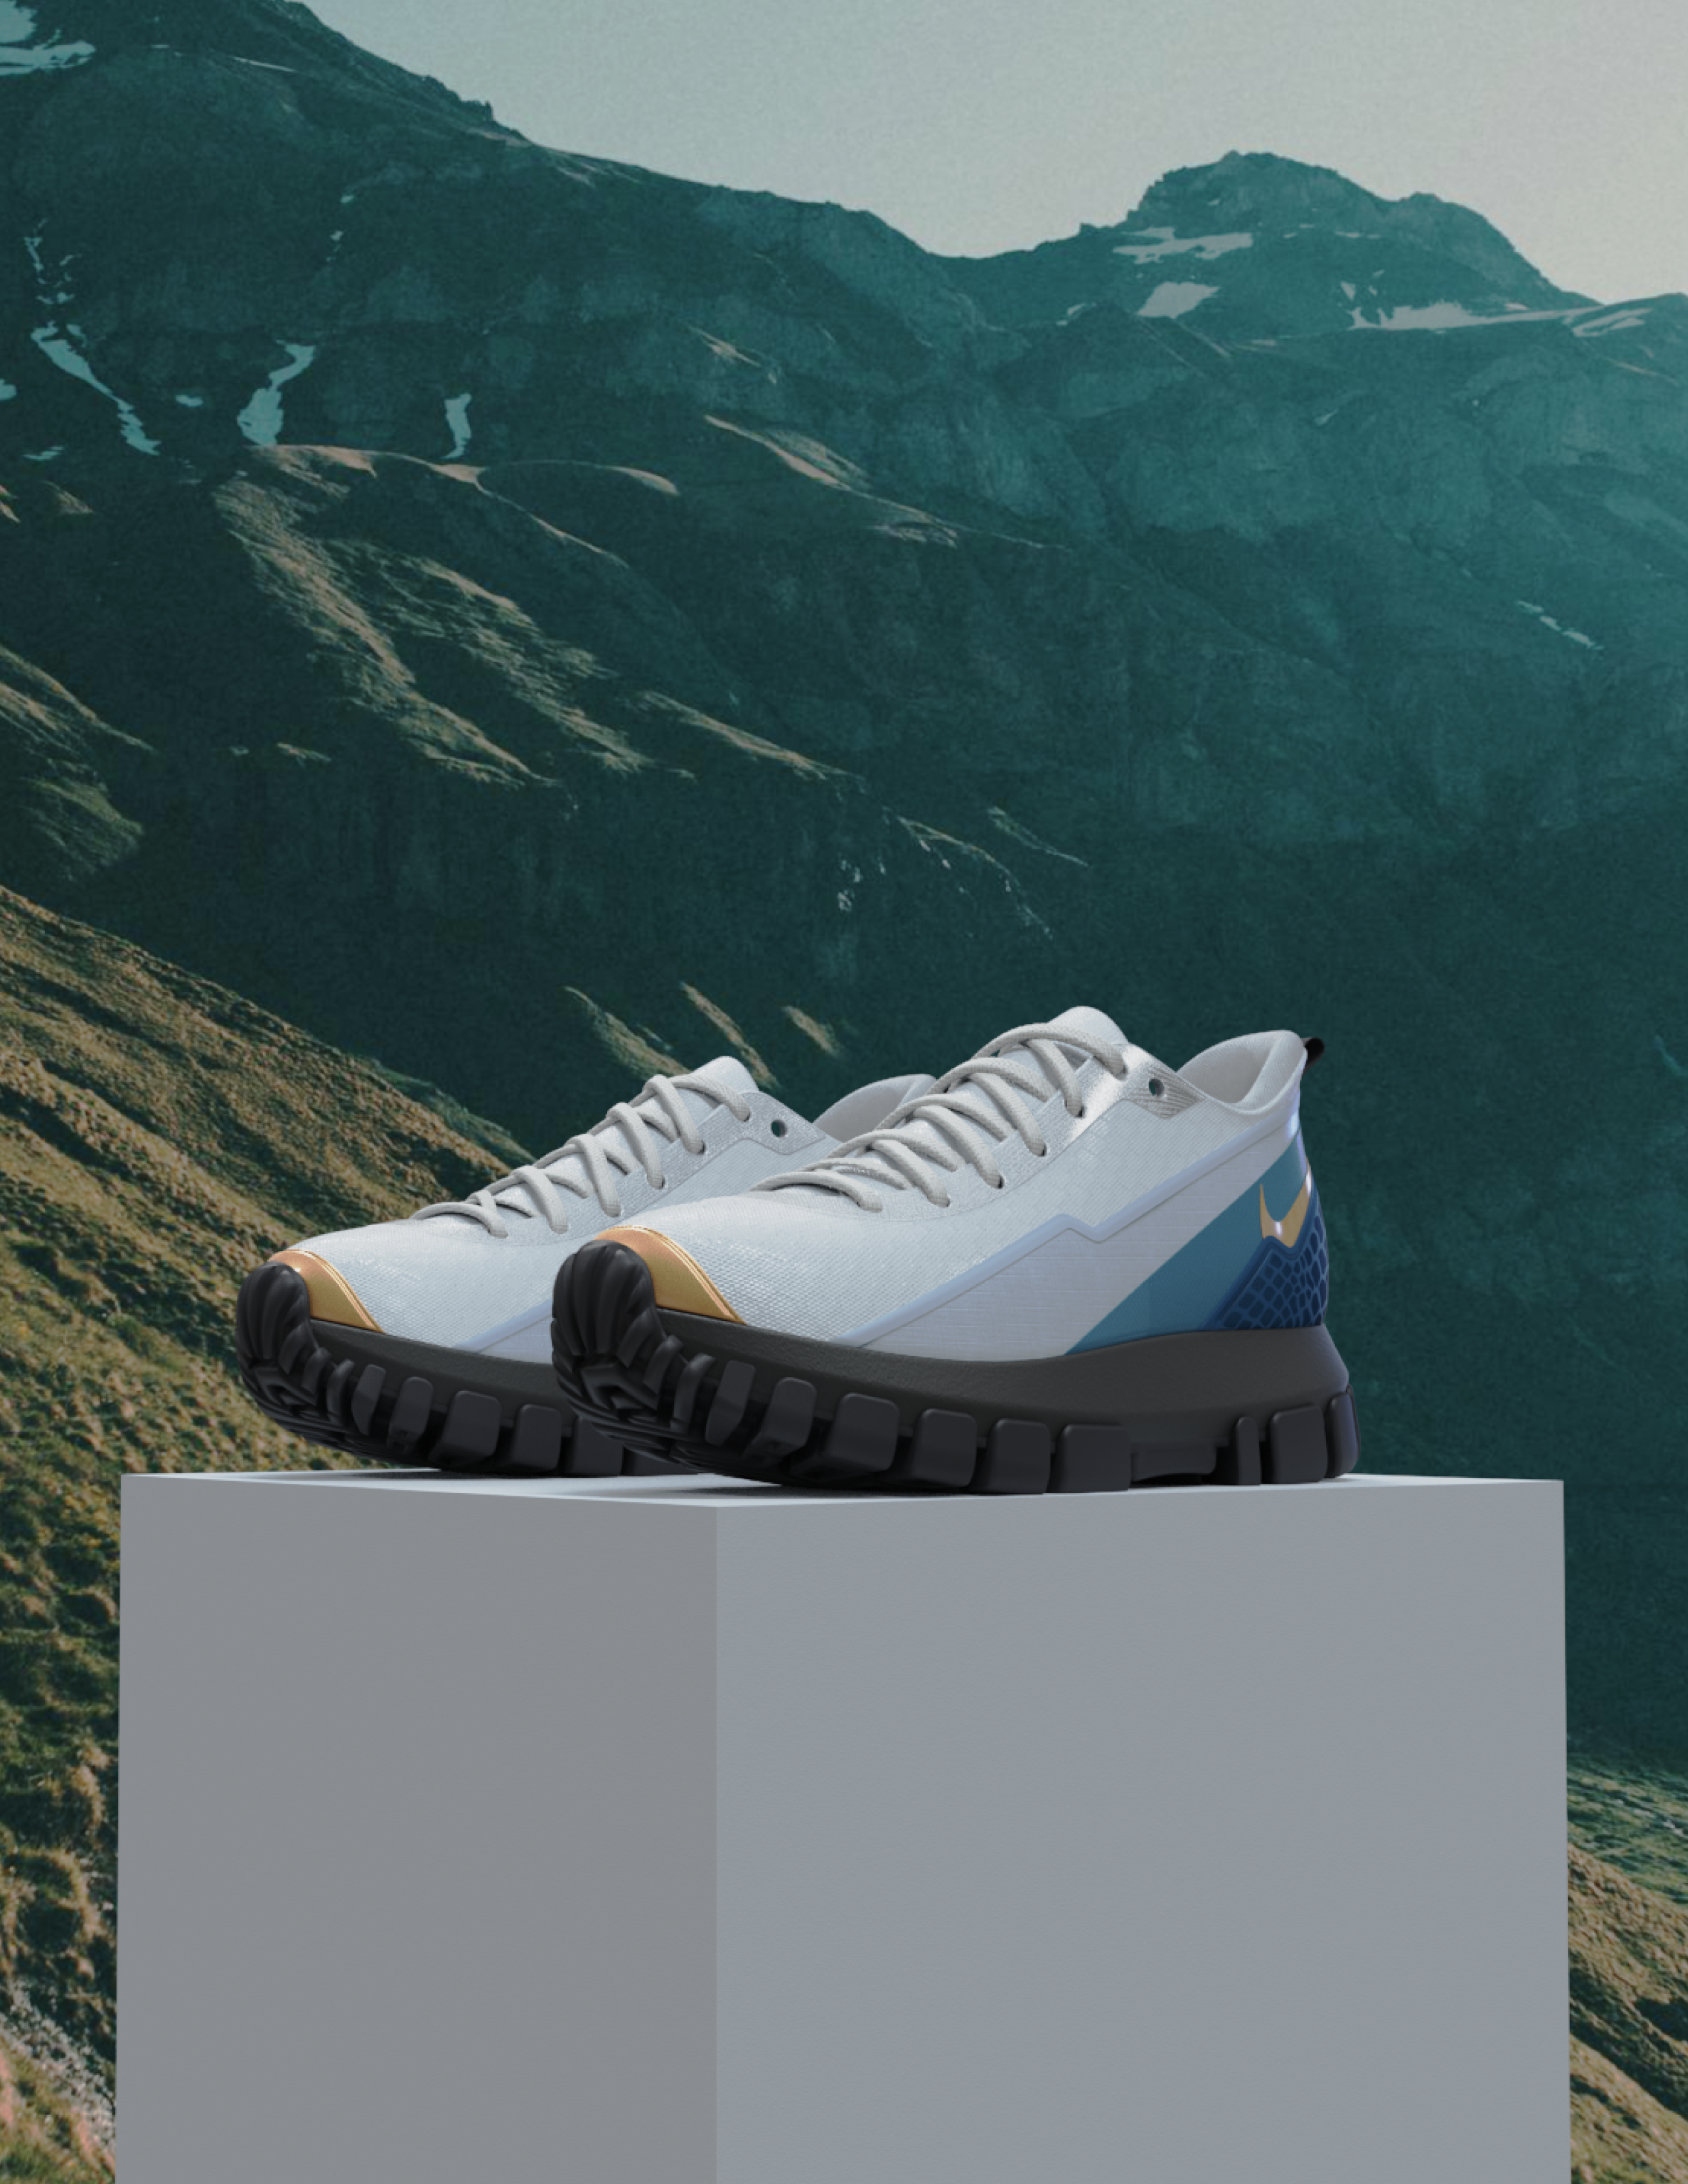 561-nike-trial-cover-image-17098415715027.png